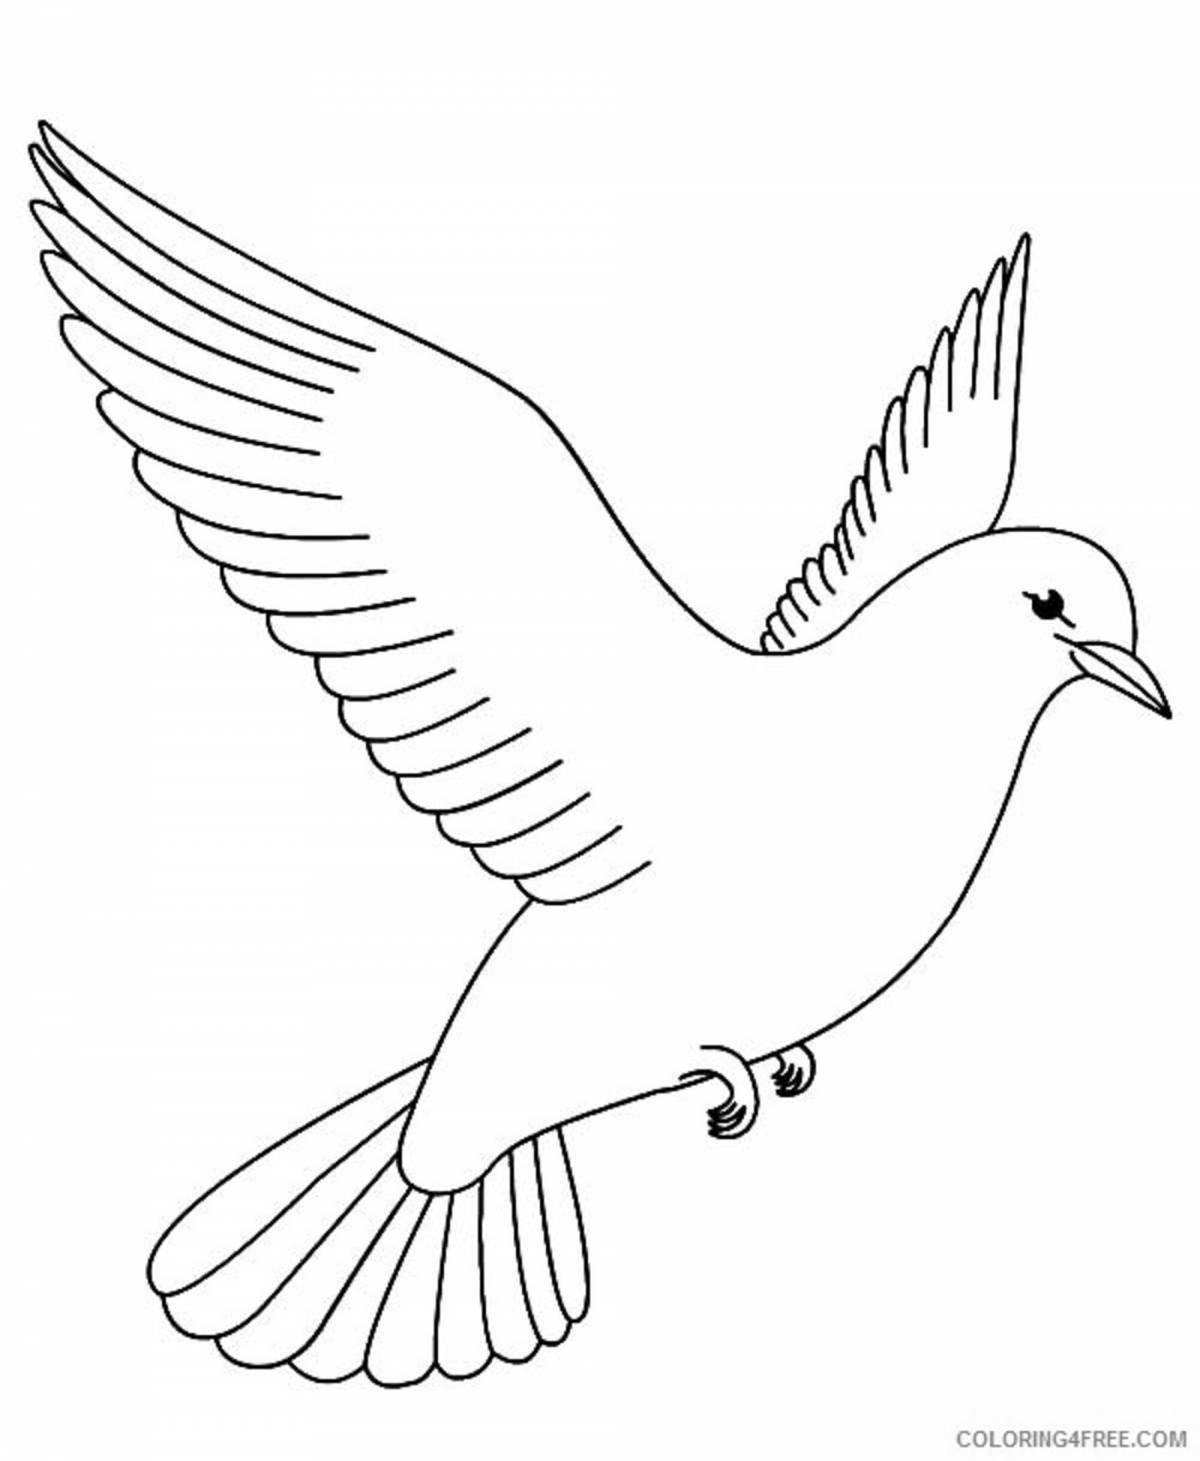 Attractive dove of peace coloring page for kids